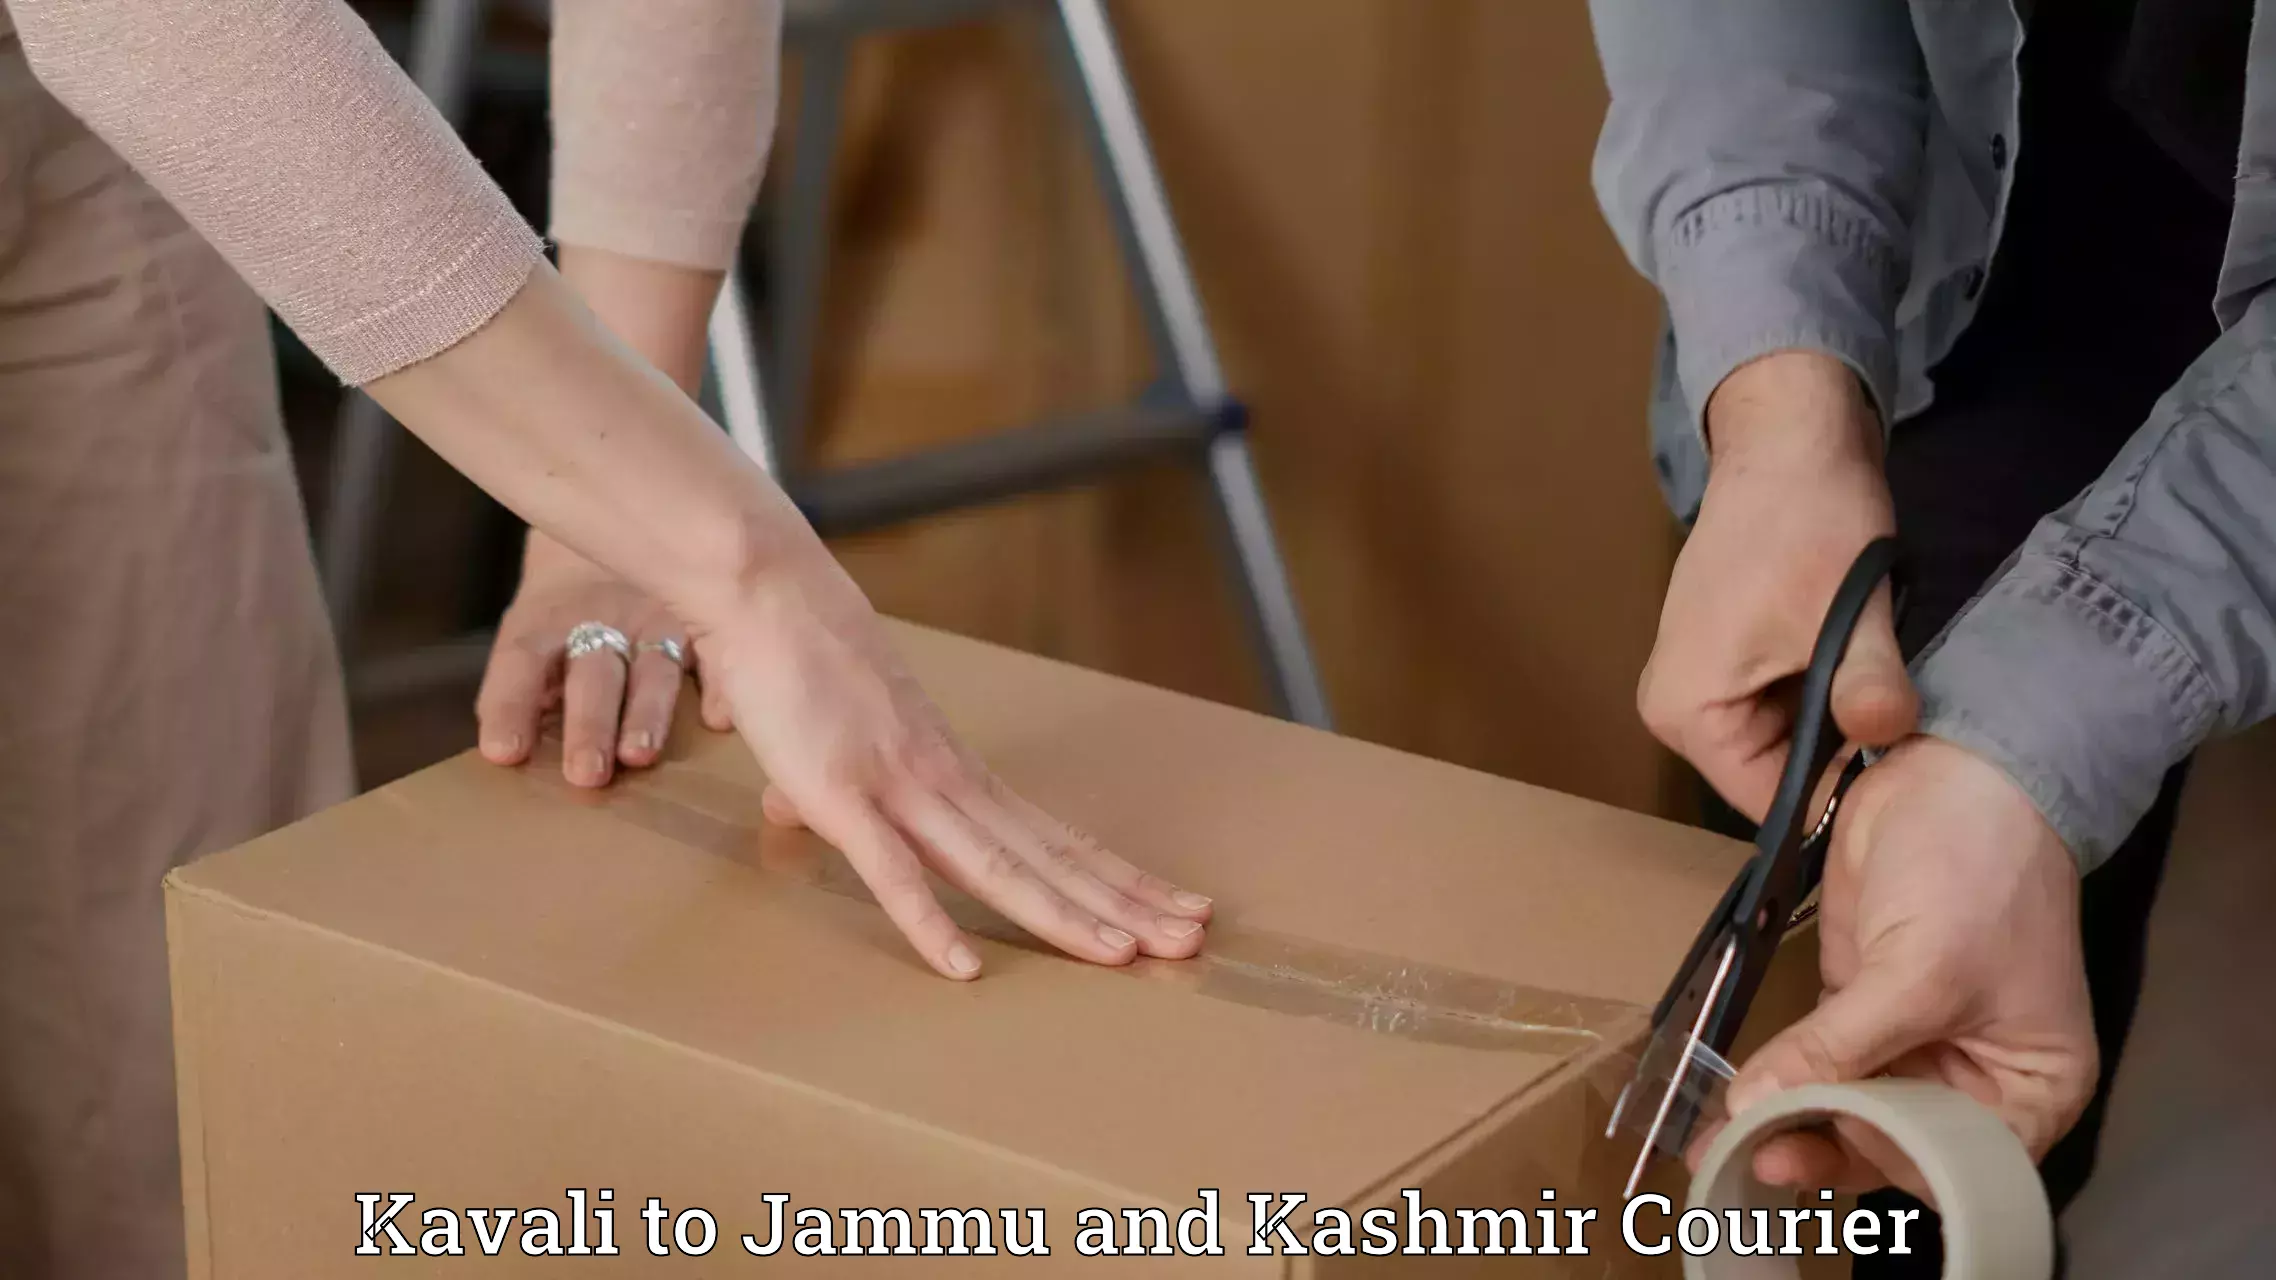 Bulk courier orders Kavali to Budgam